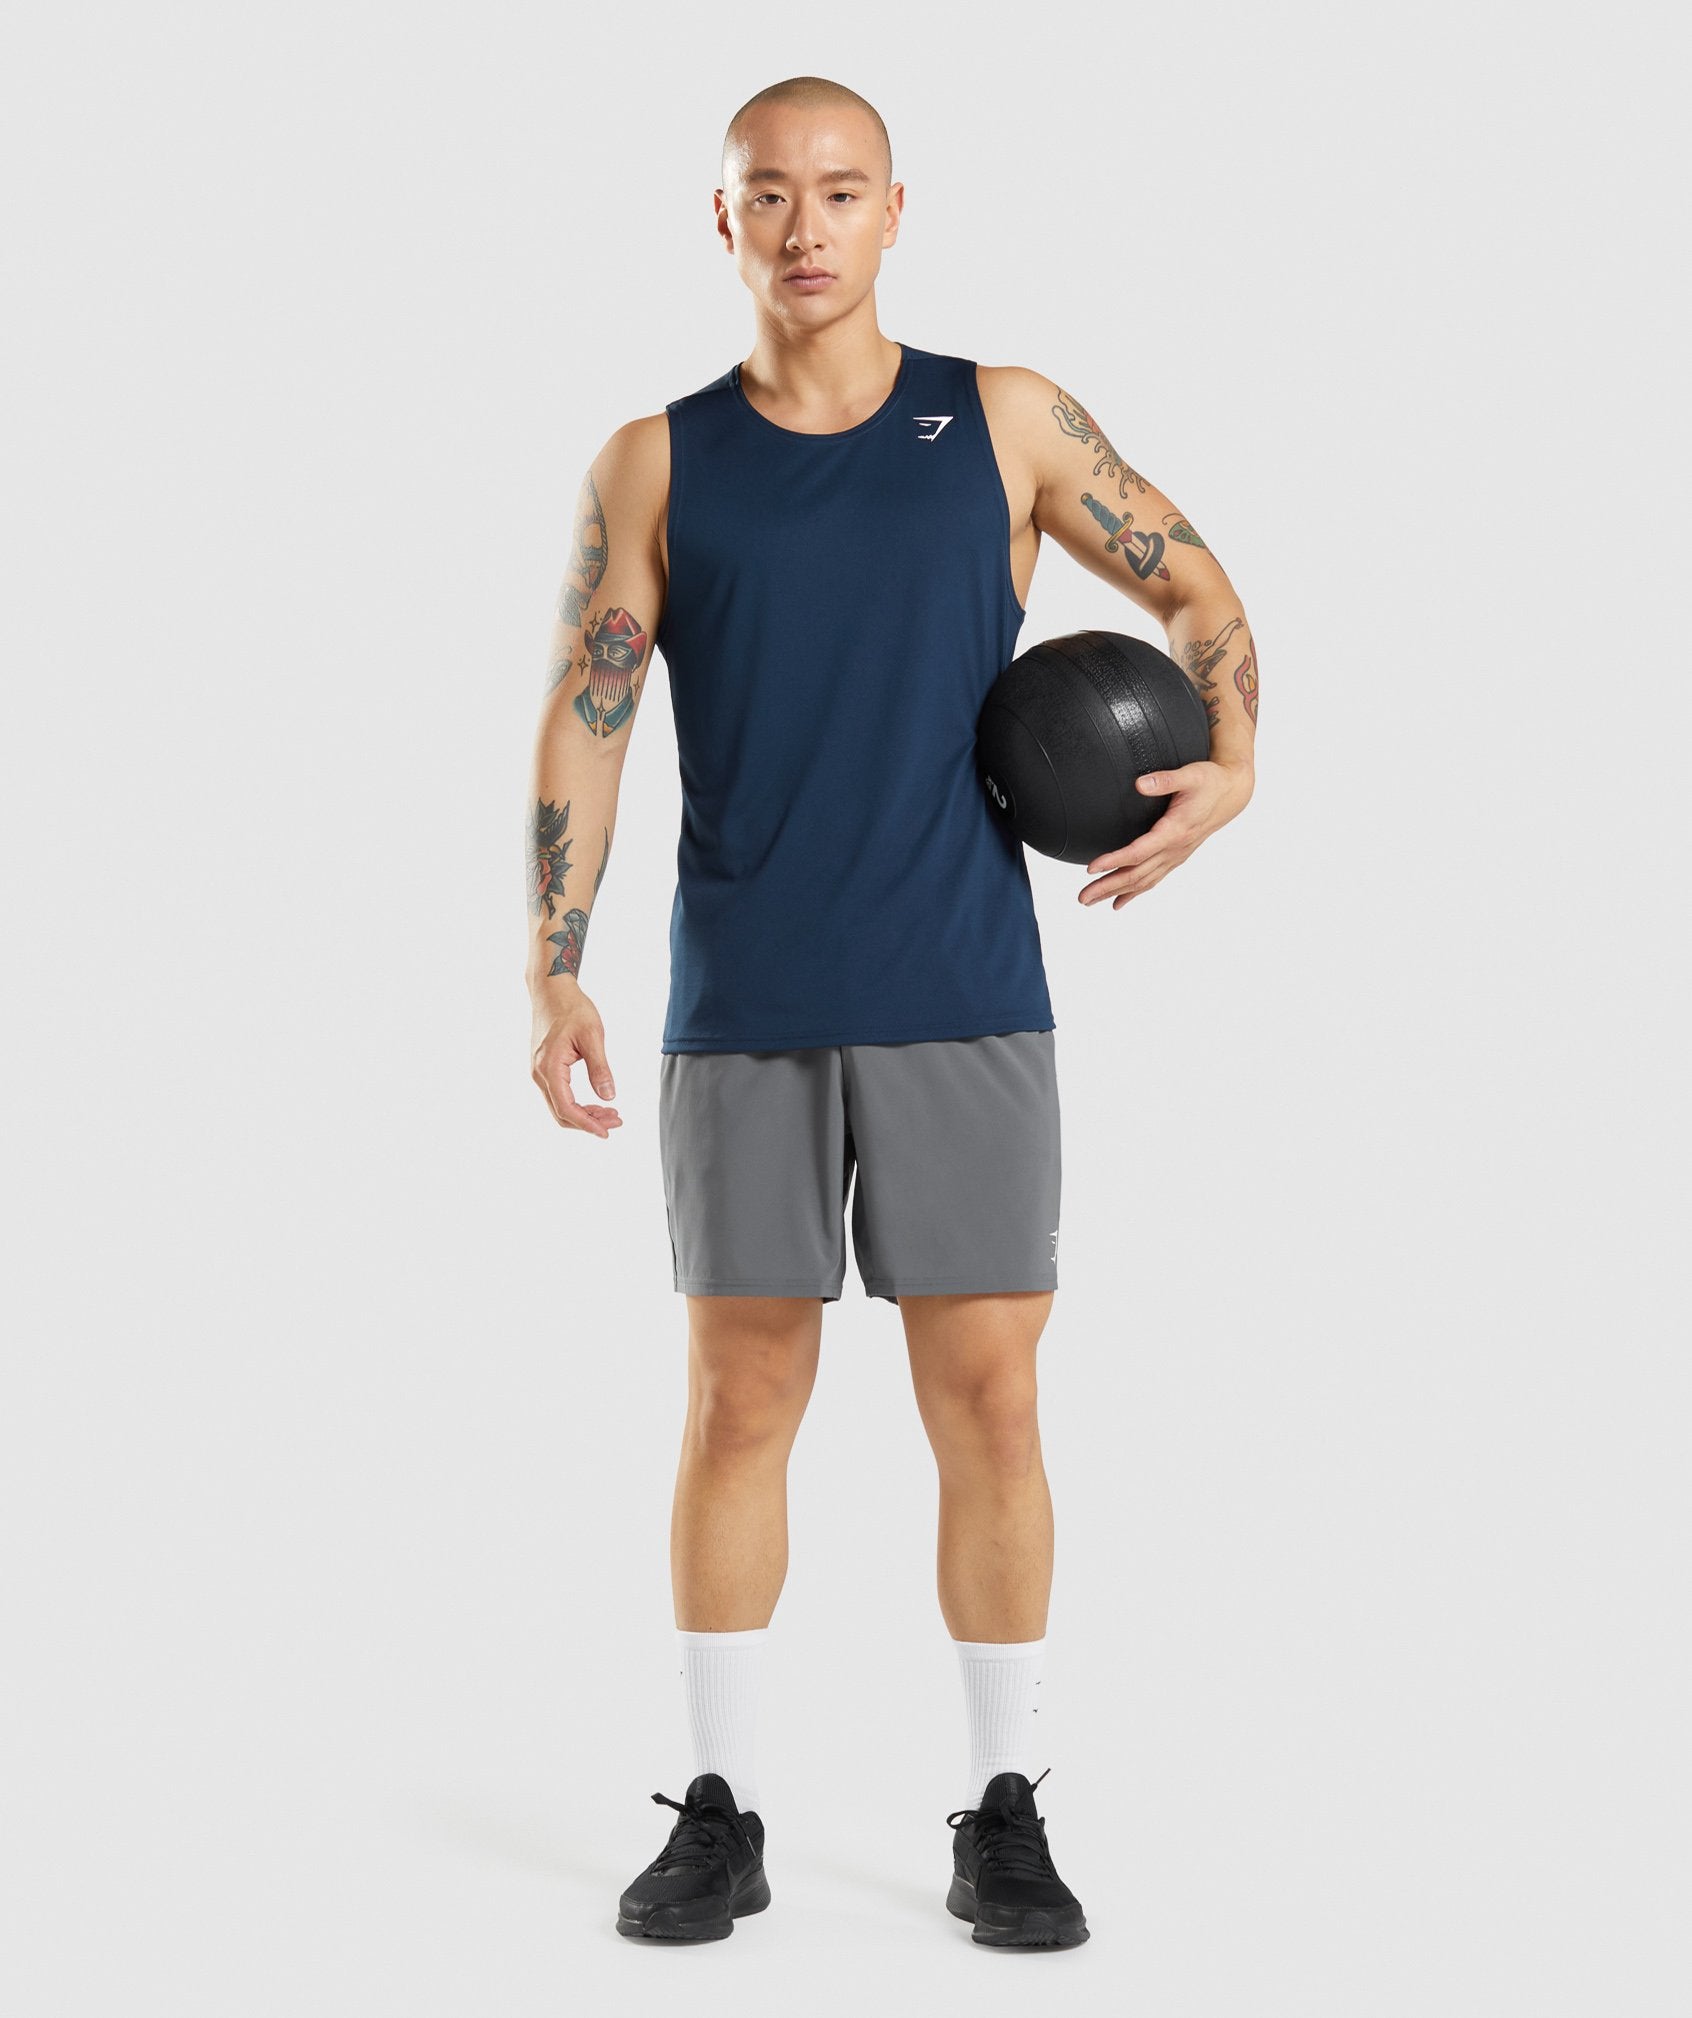 Arrival Tank in Navy - view 4